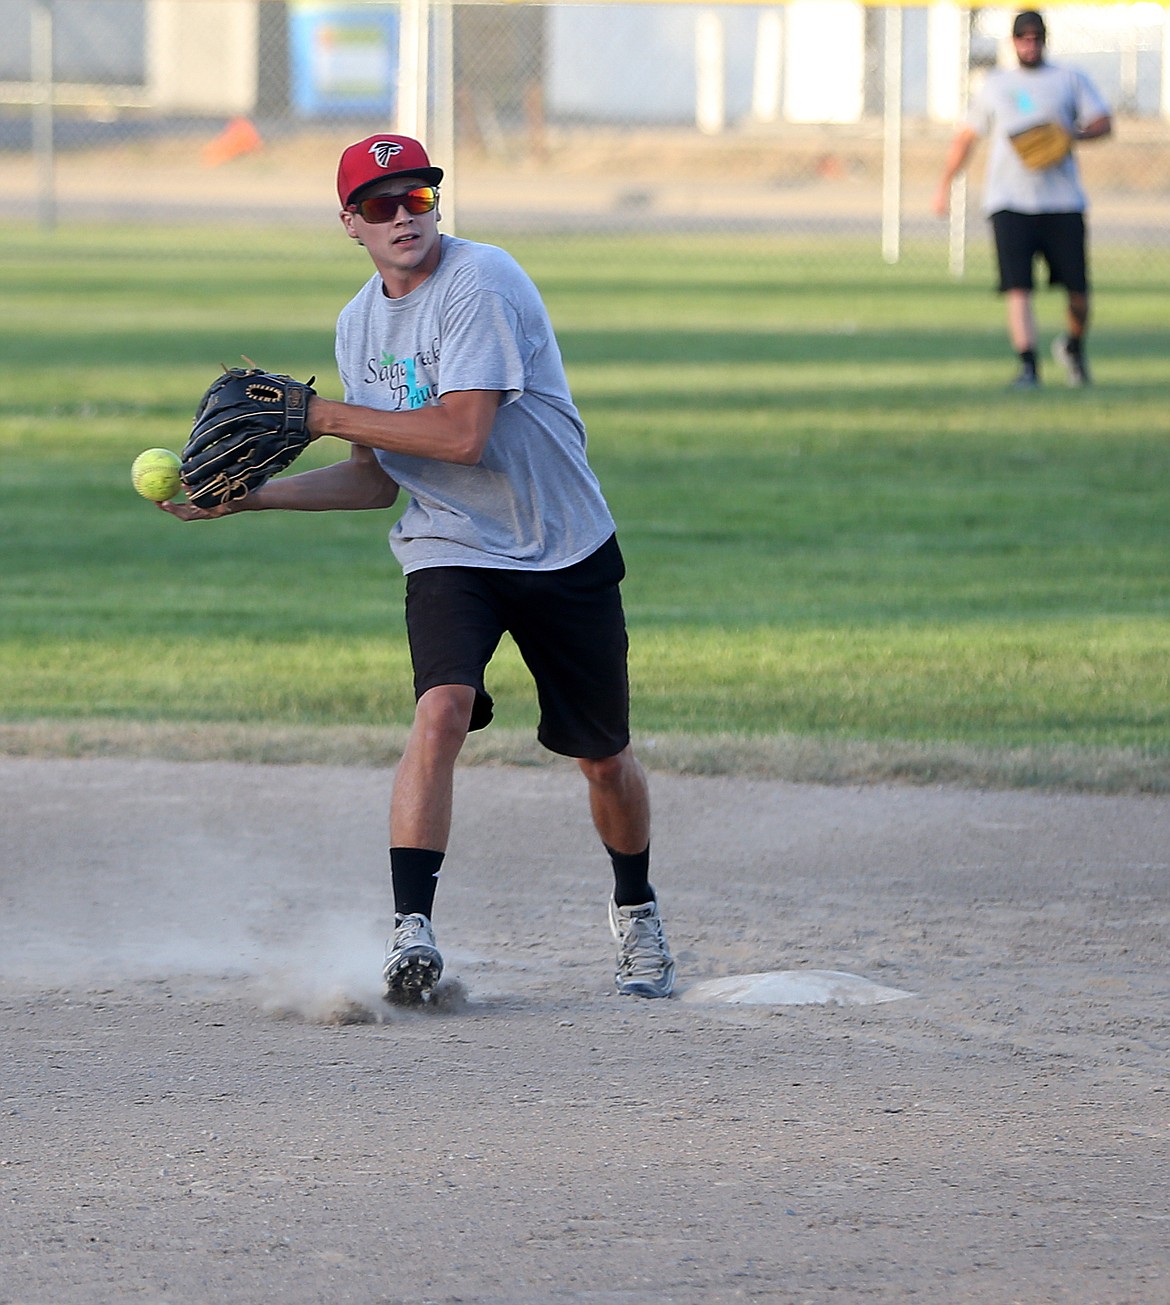 Gary Doney of Sage Creek Products steps on second base and throws to first in a game against Northwest Specialty Hospital on Thursday at Ramsey Park.